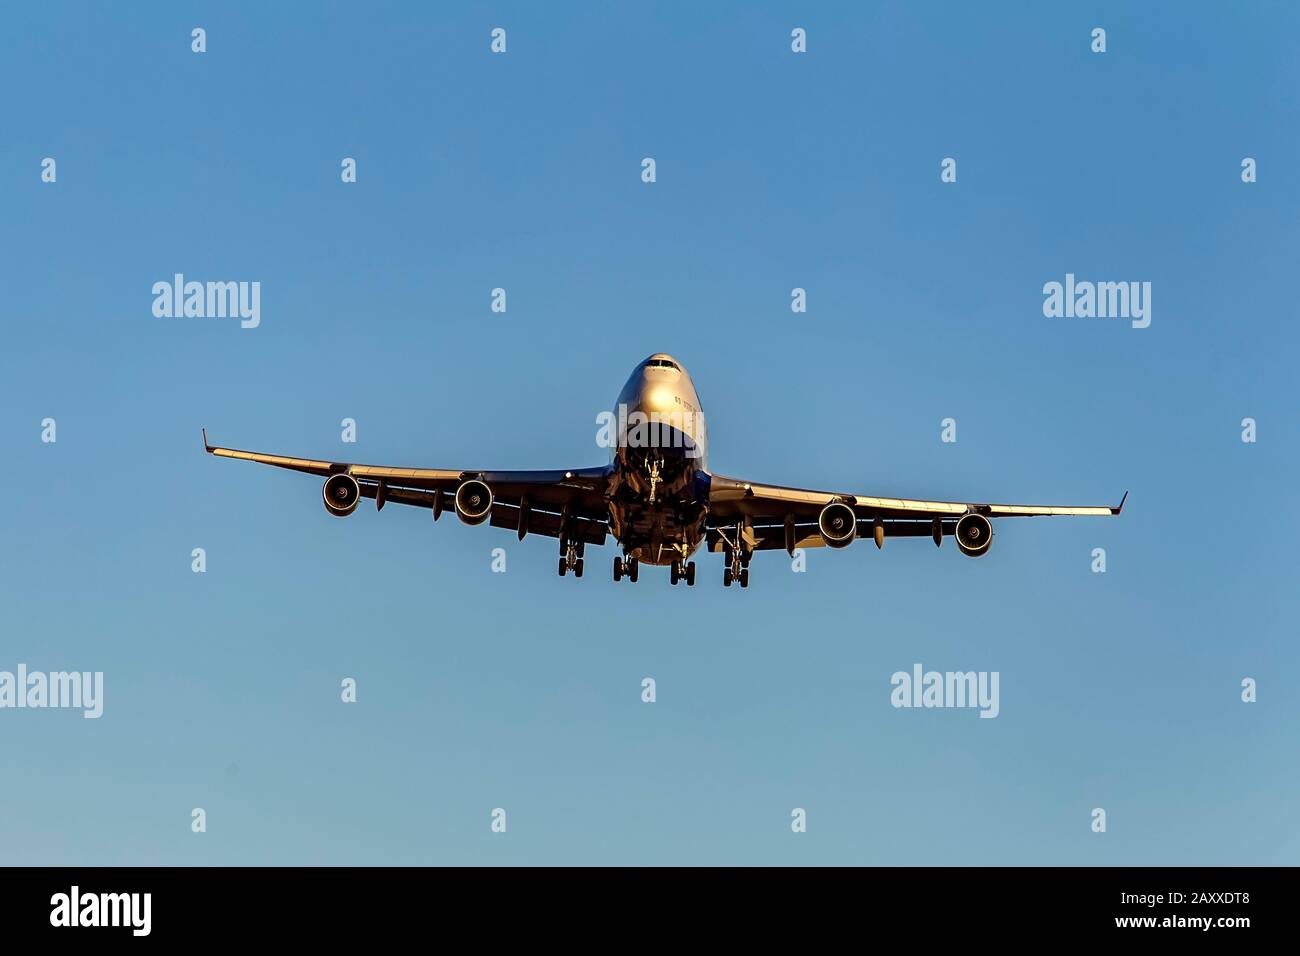 A jumbo jet coming in for a landing. Stock Photo